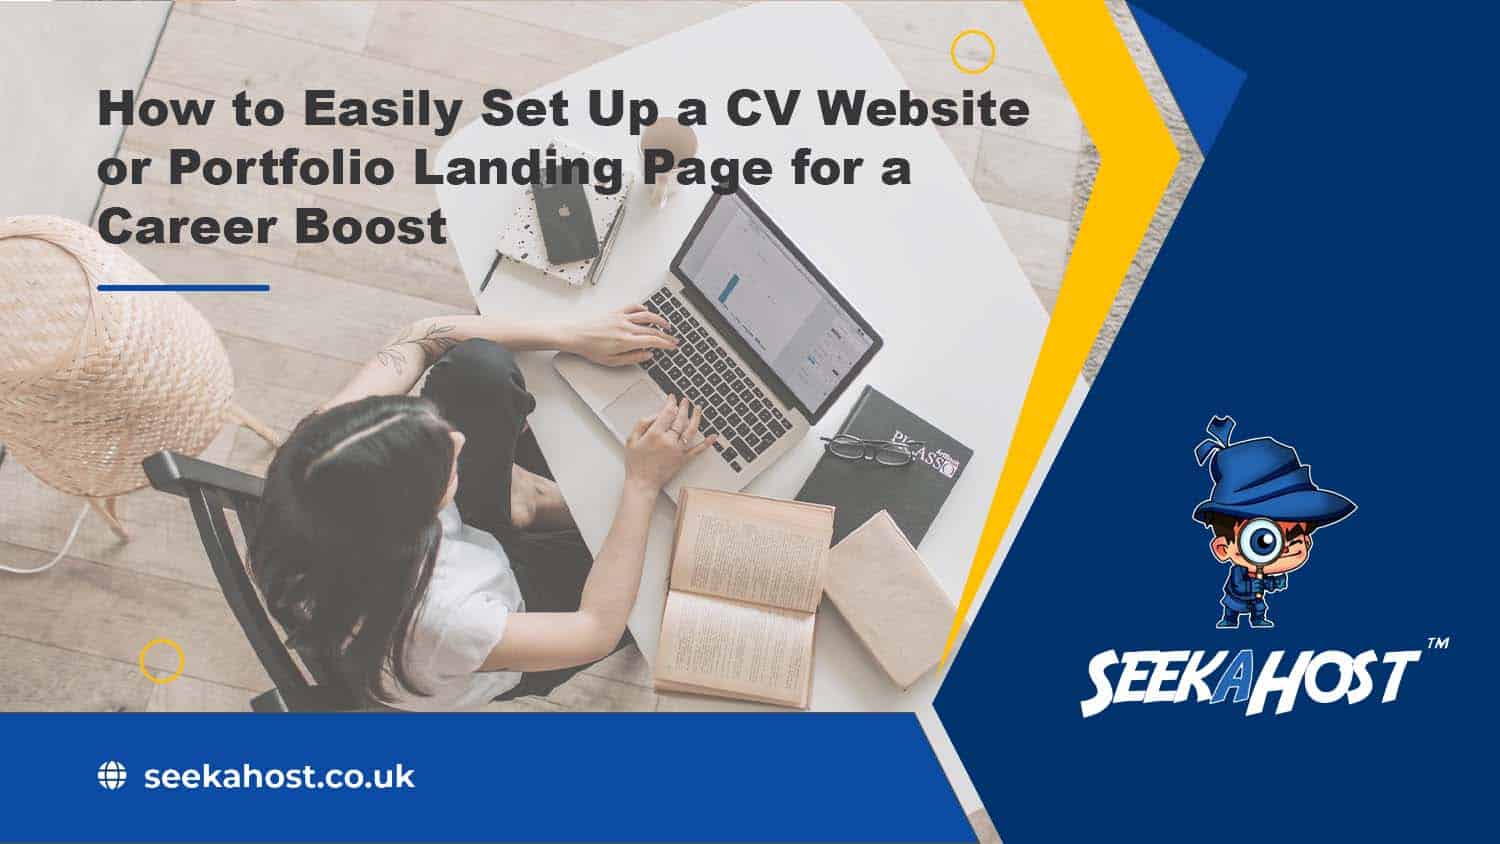 how-to-easily-set-up-a-cv-website-for-a-career-boost